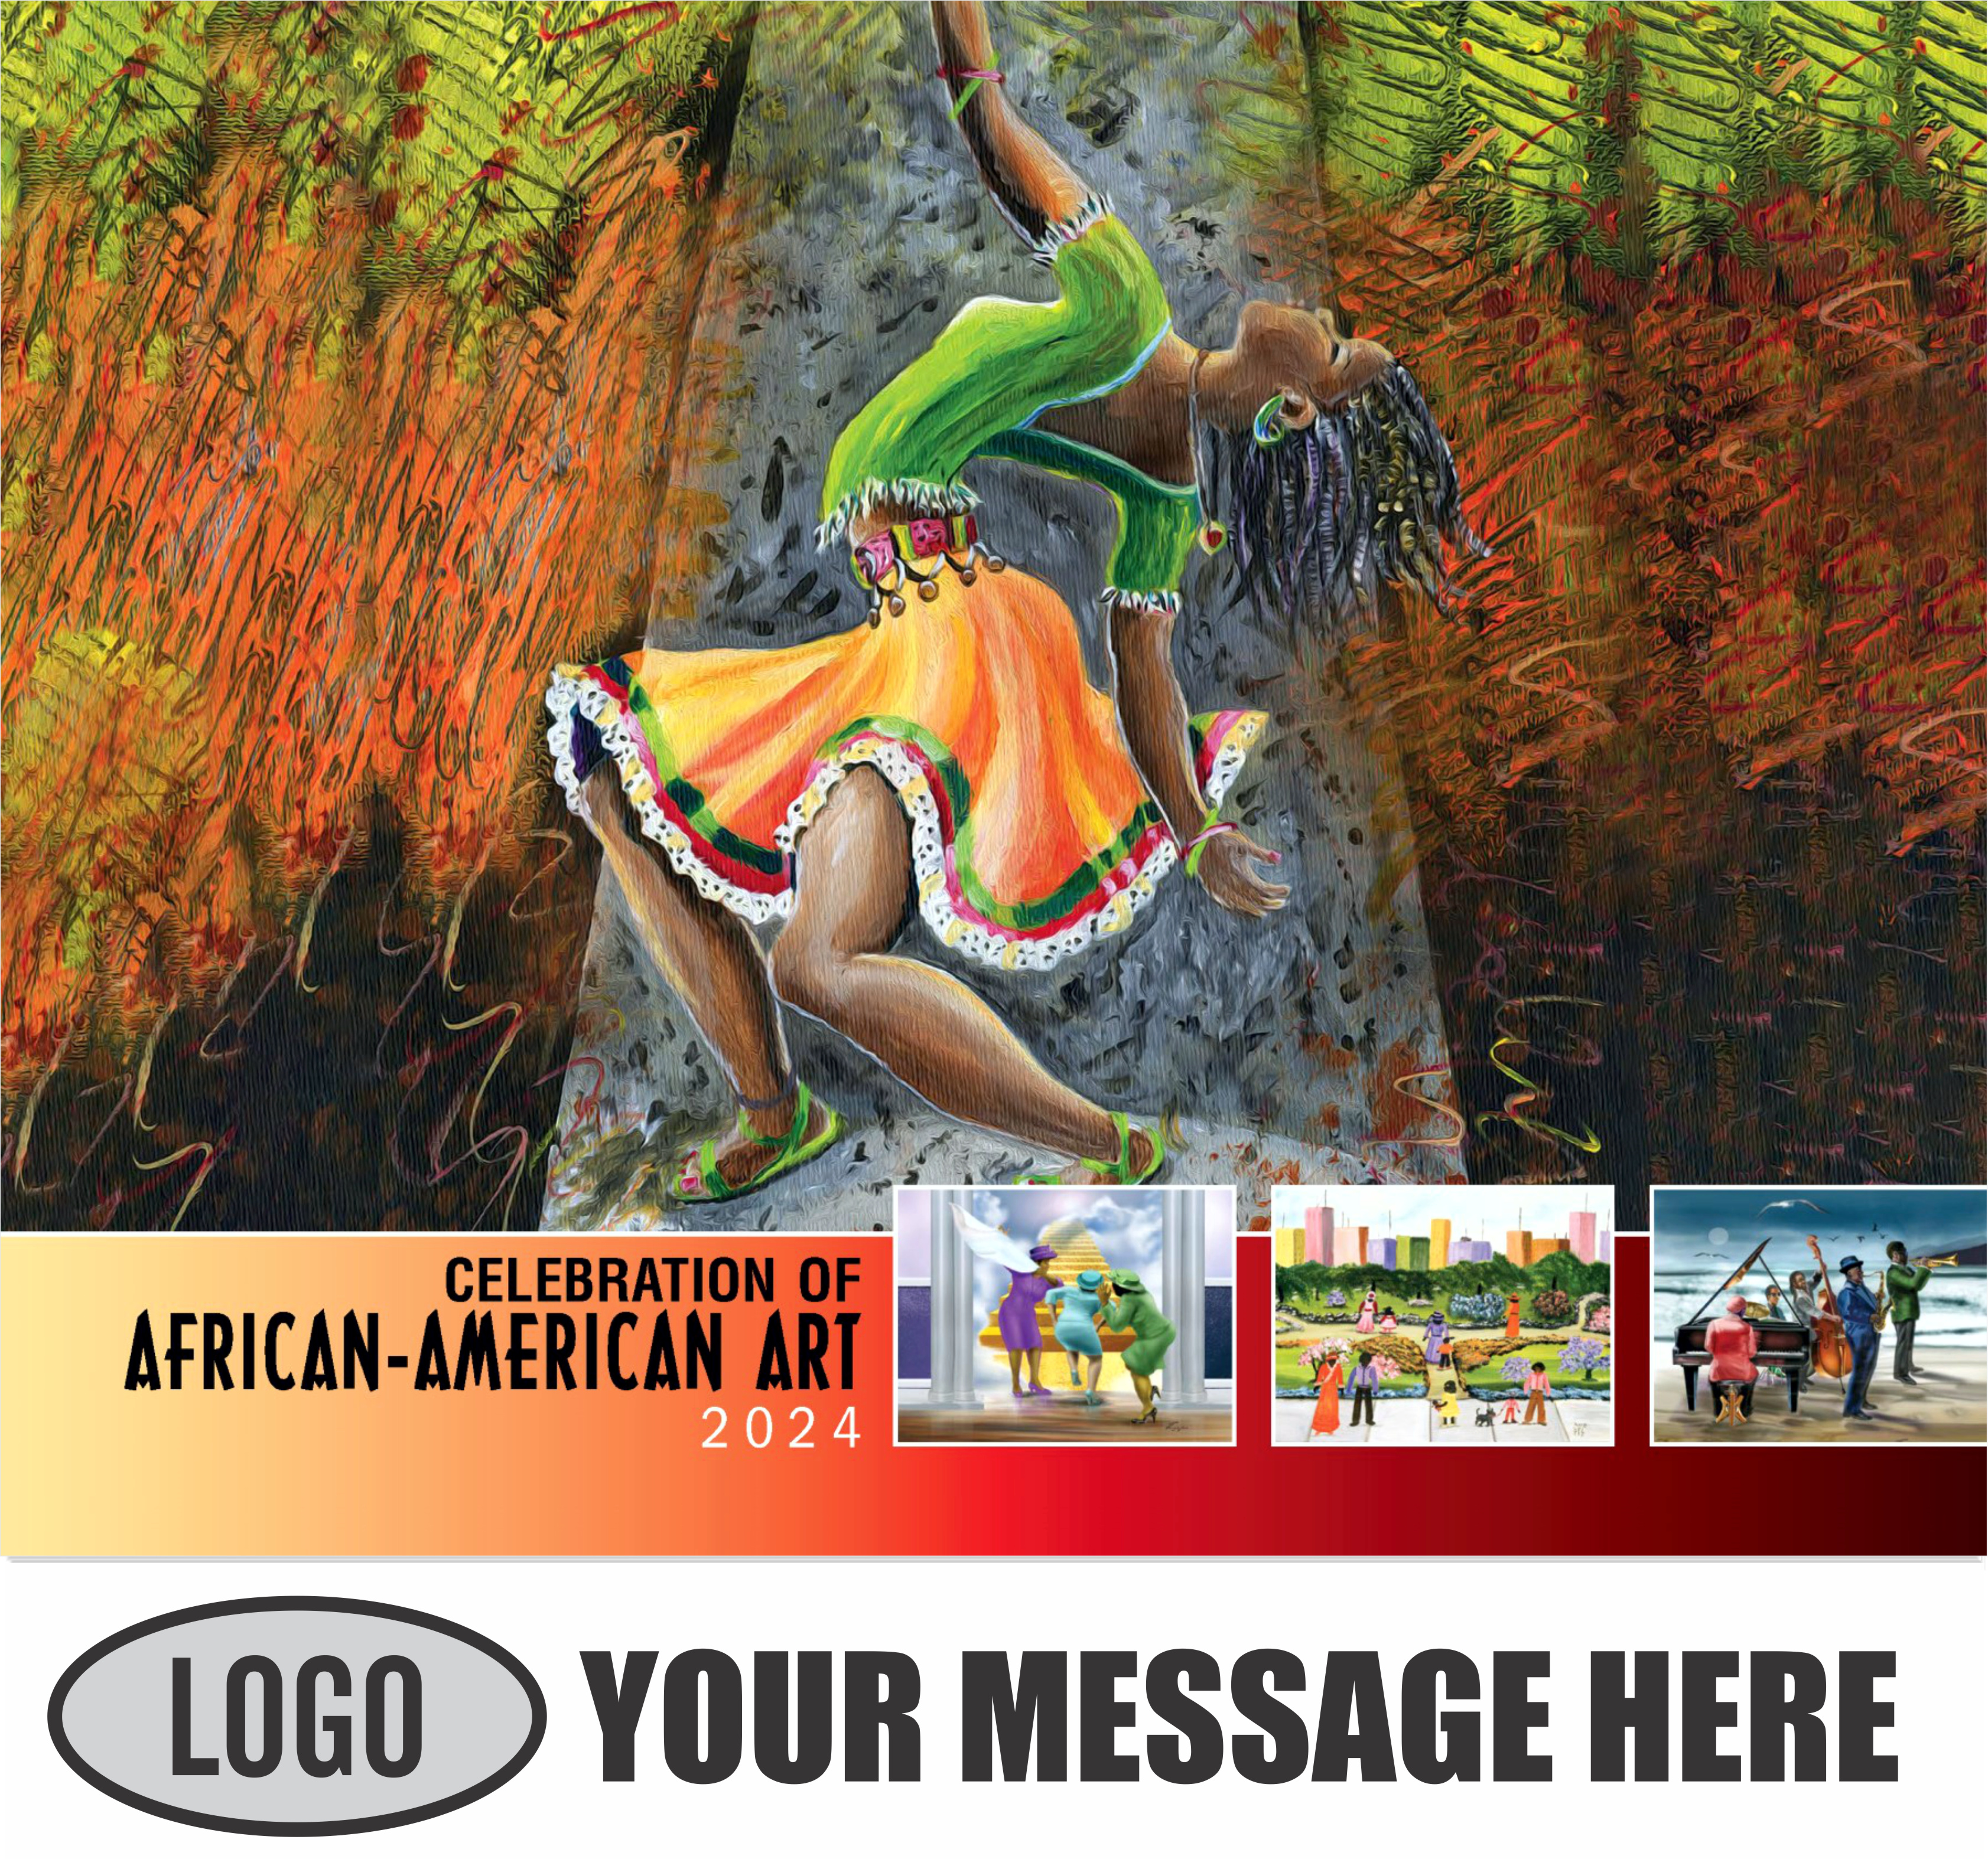 Celebration of African American Art 2024 Business Promotional Calendar - cover